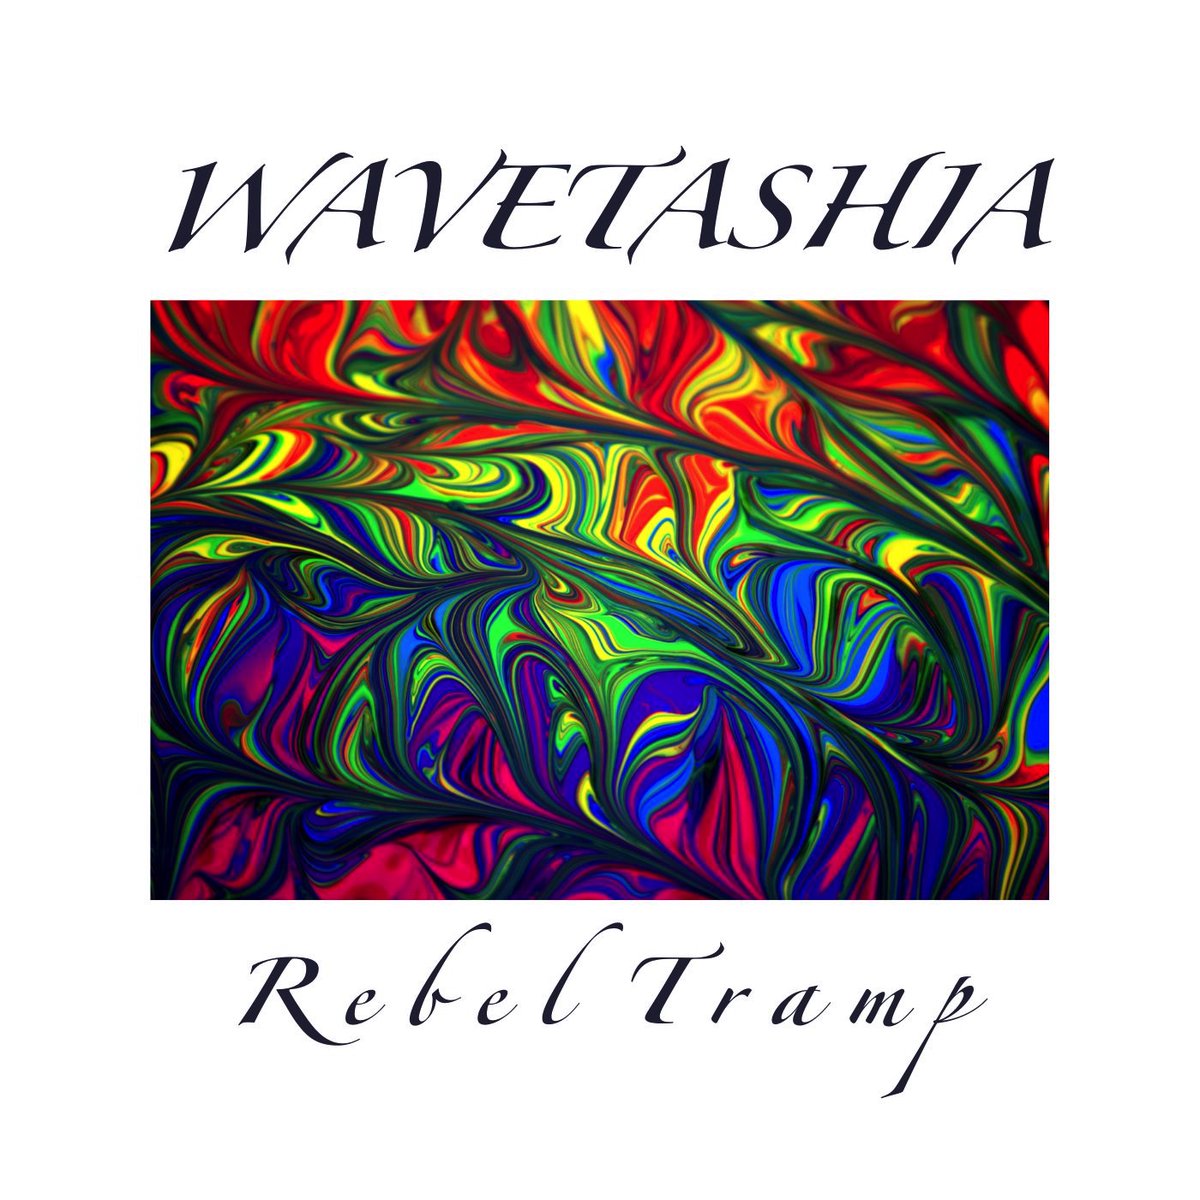 #ART #MUSIC  
This is the first single from the Lights And Lines #AlbumWritingClub winner of Best EP, Rebel Tramp! 
Imagine a crazy mix of blues rock and experimental electronic music.Part of the #LALSummerSingles series. 
rebeltramp.bandcamp.com/album/wavetash…